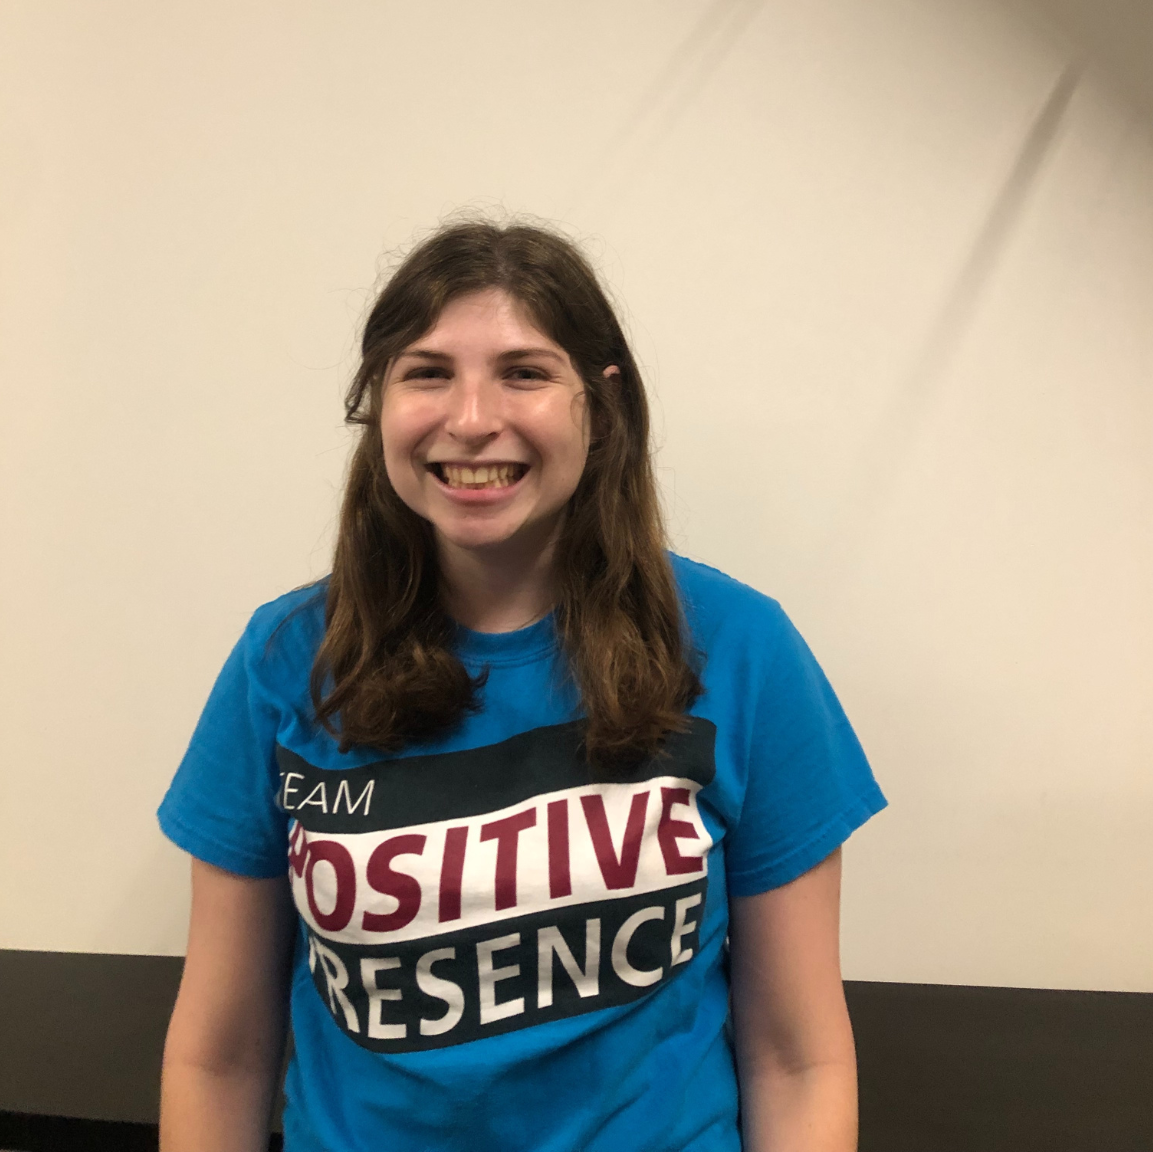 A white woman with brown hair standing in front of a blank wall, smiling widely in a tee shirt that reads "Team Positive Presence"..